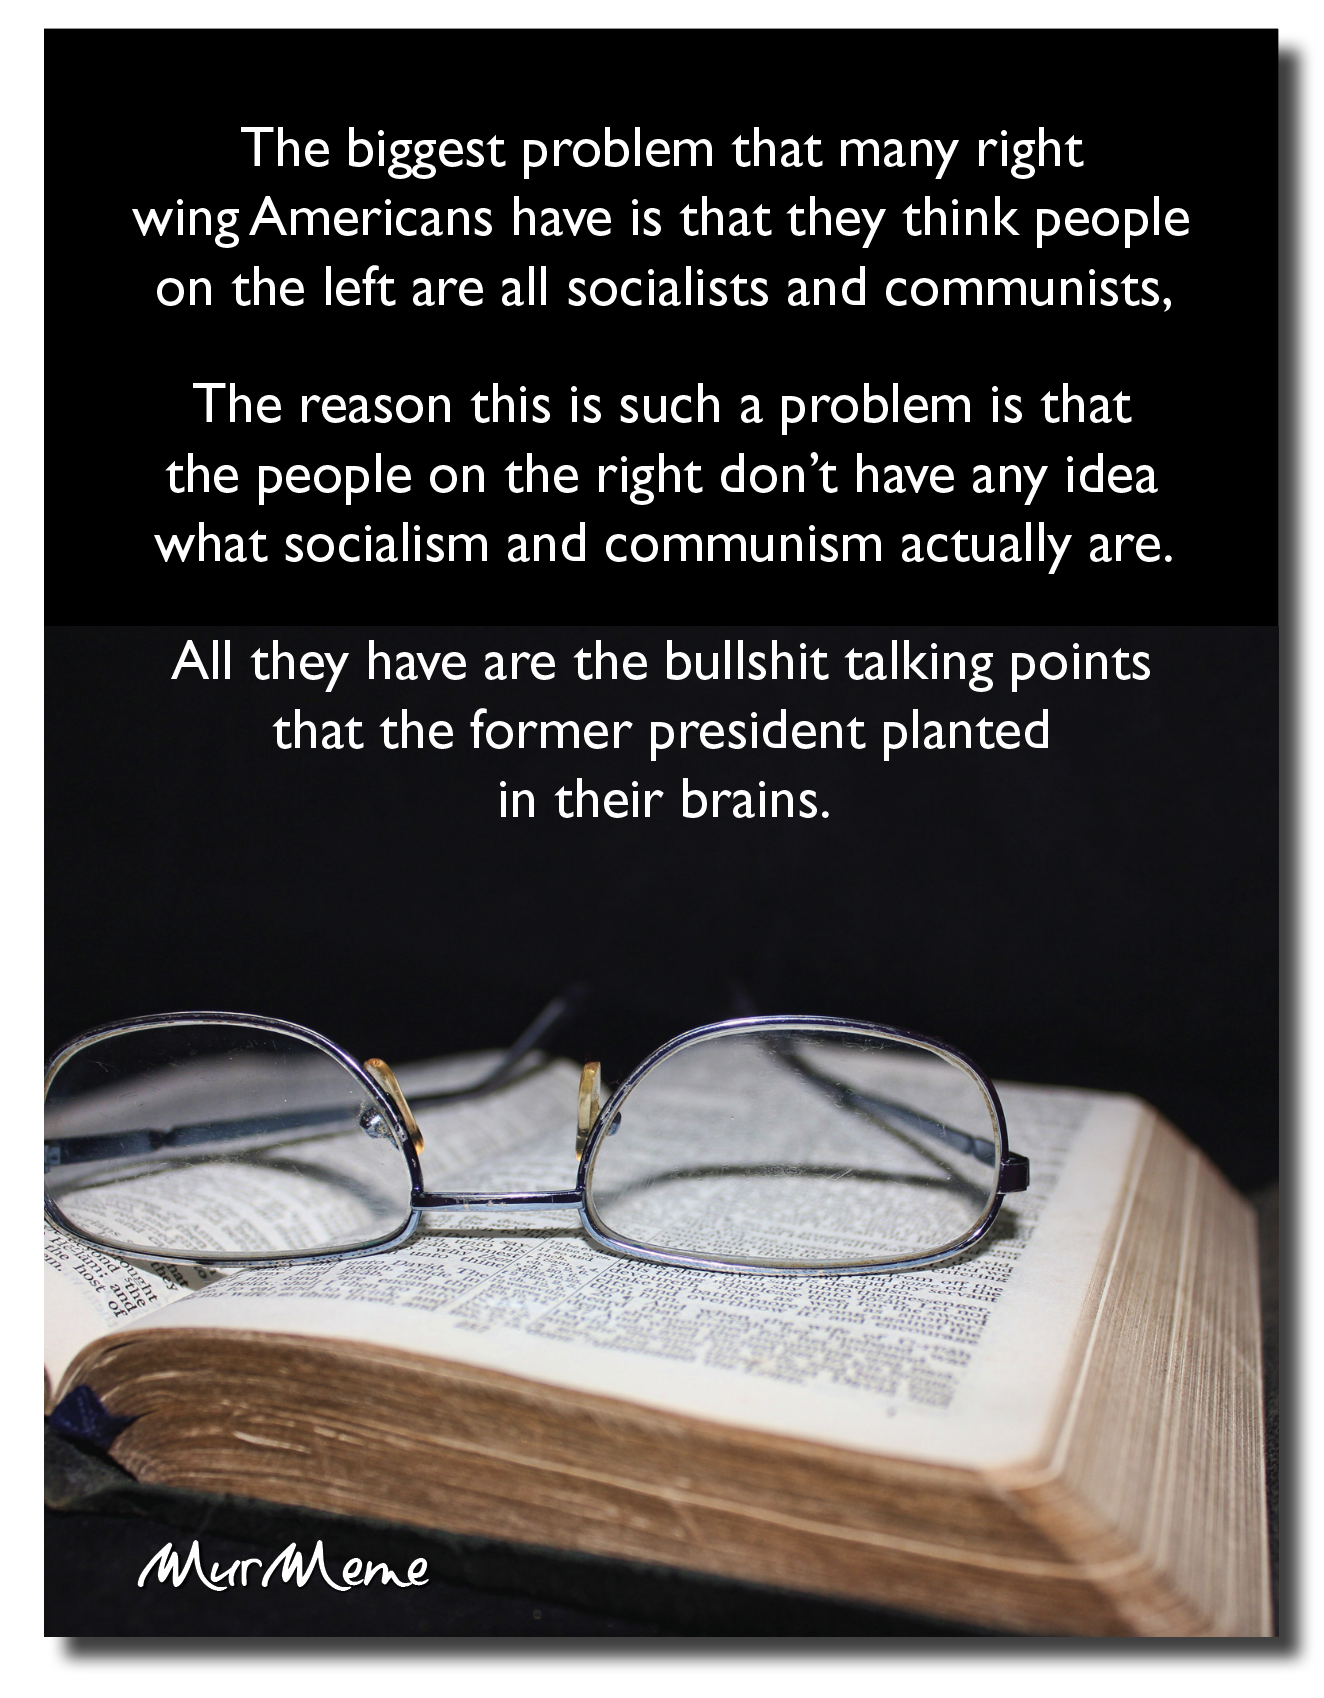 The biggest problem that many right
wing Americans have is that they think people
on the left are all socialists and communists,

The reason this is such a problem is that
the people on the right don’t have any idea
what socialism and communism actually are.

All they have are the bullshit talking points
that the former president planted
in their brains.